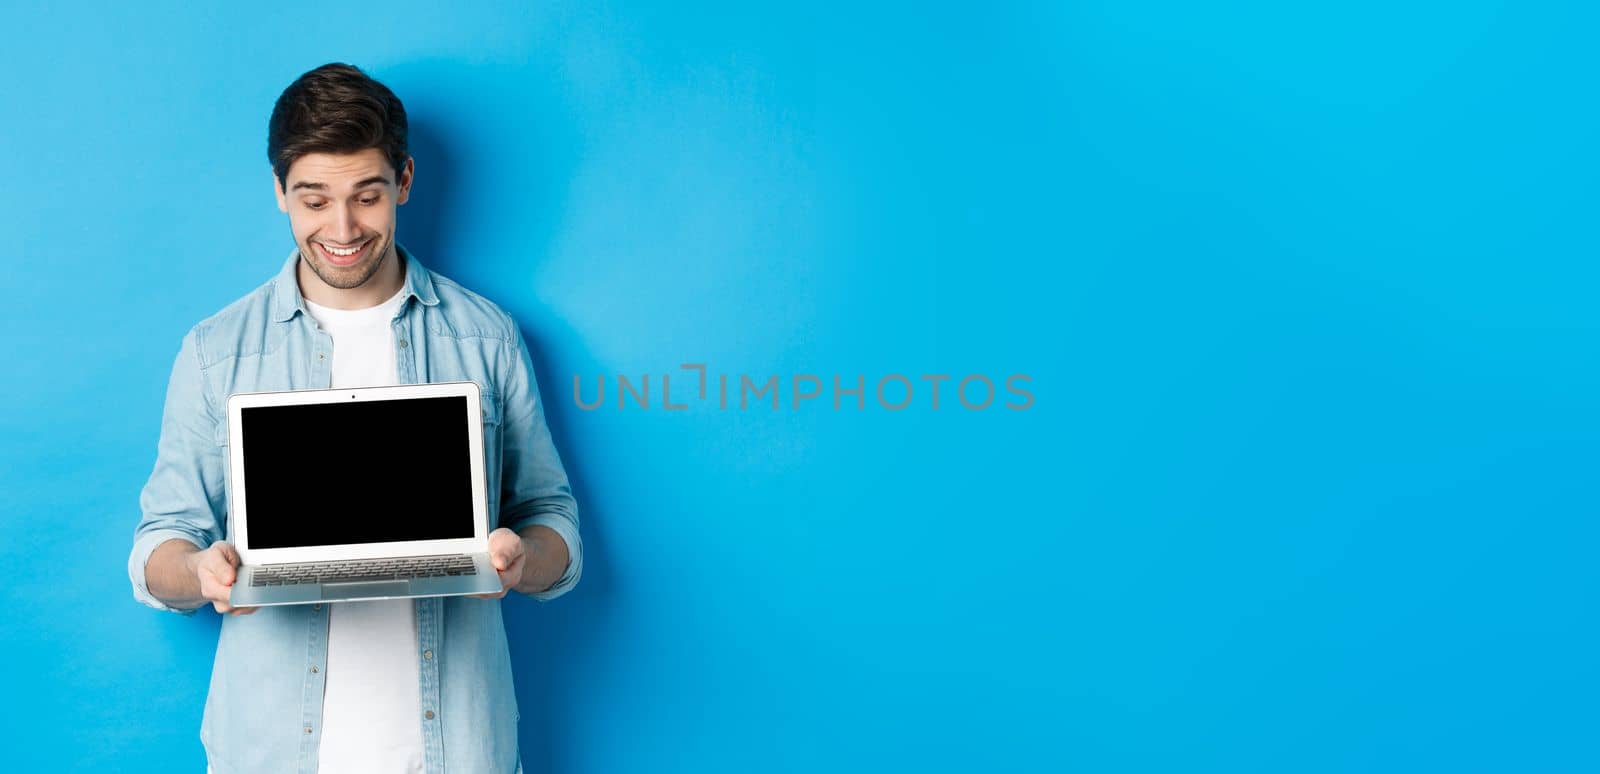 Excited handsome man looking at screen, showing promo offer on computer screen, smiling amazed, standing over blue background.